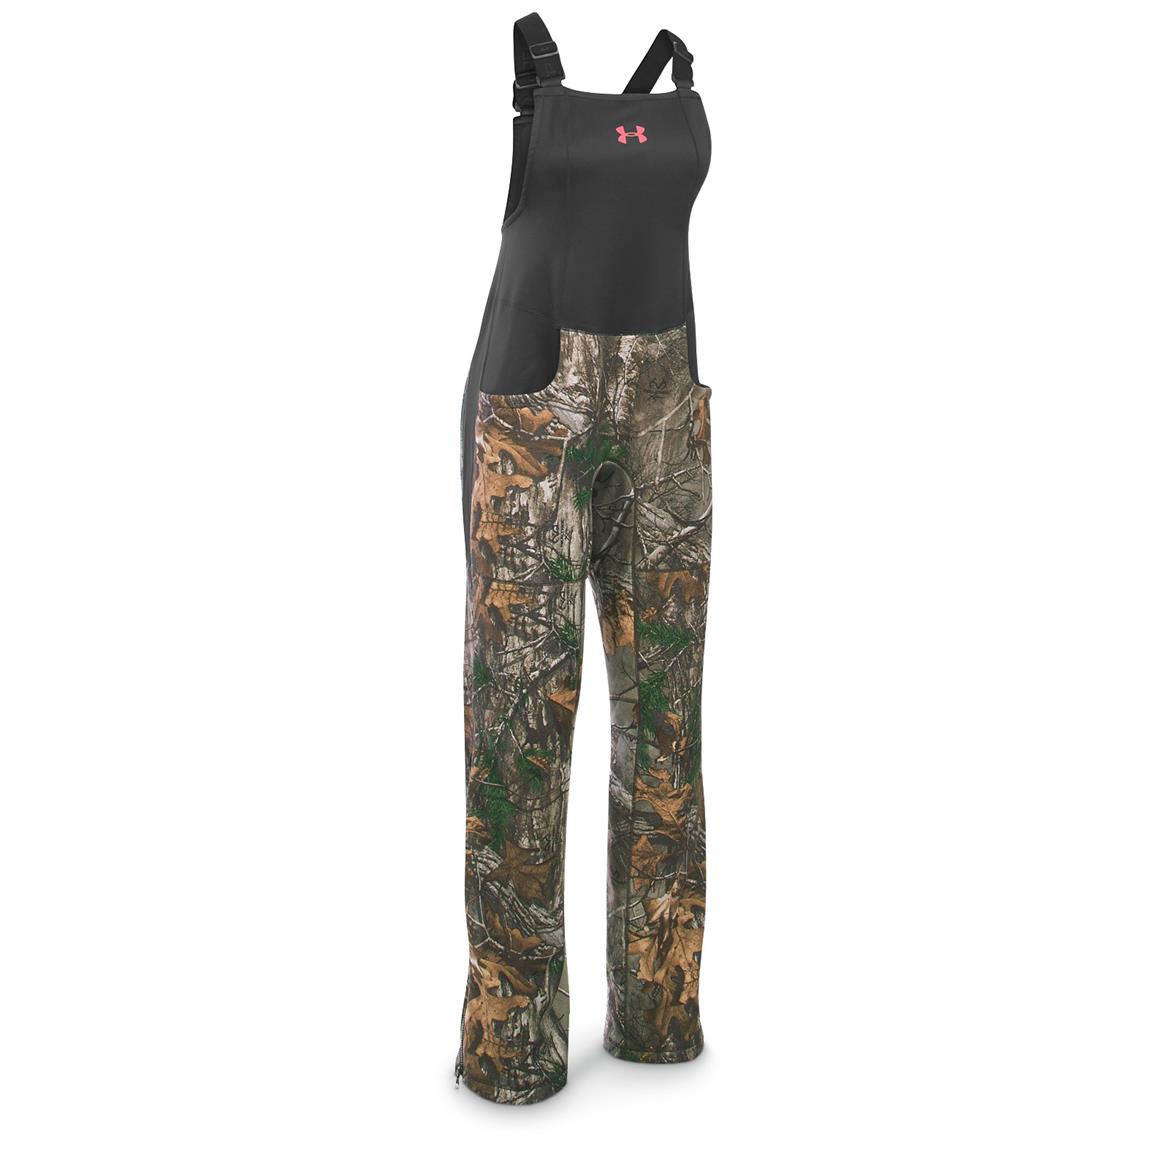 under armour hunting gear closeout